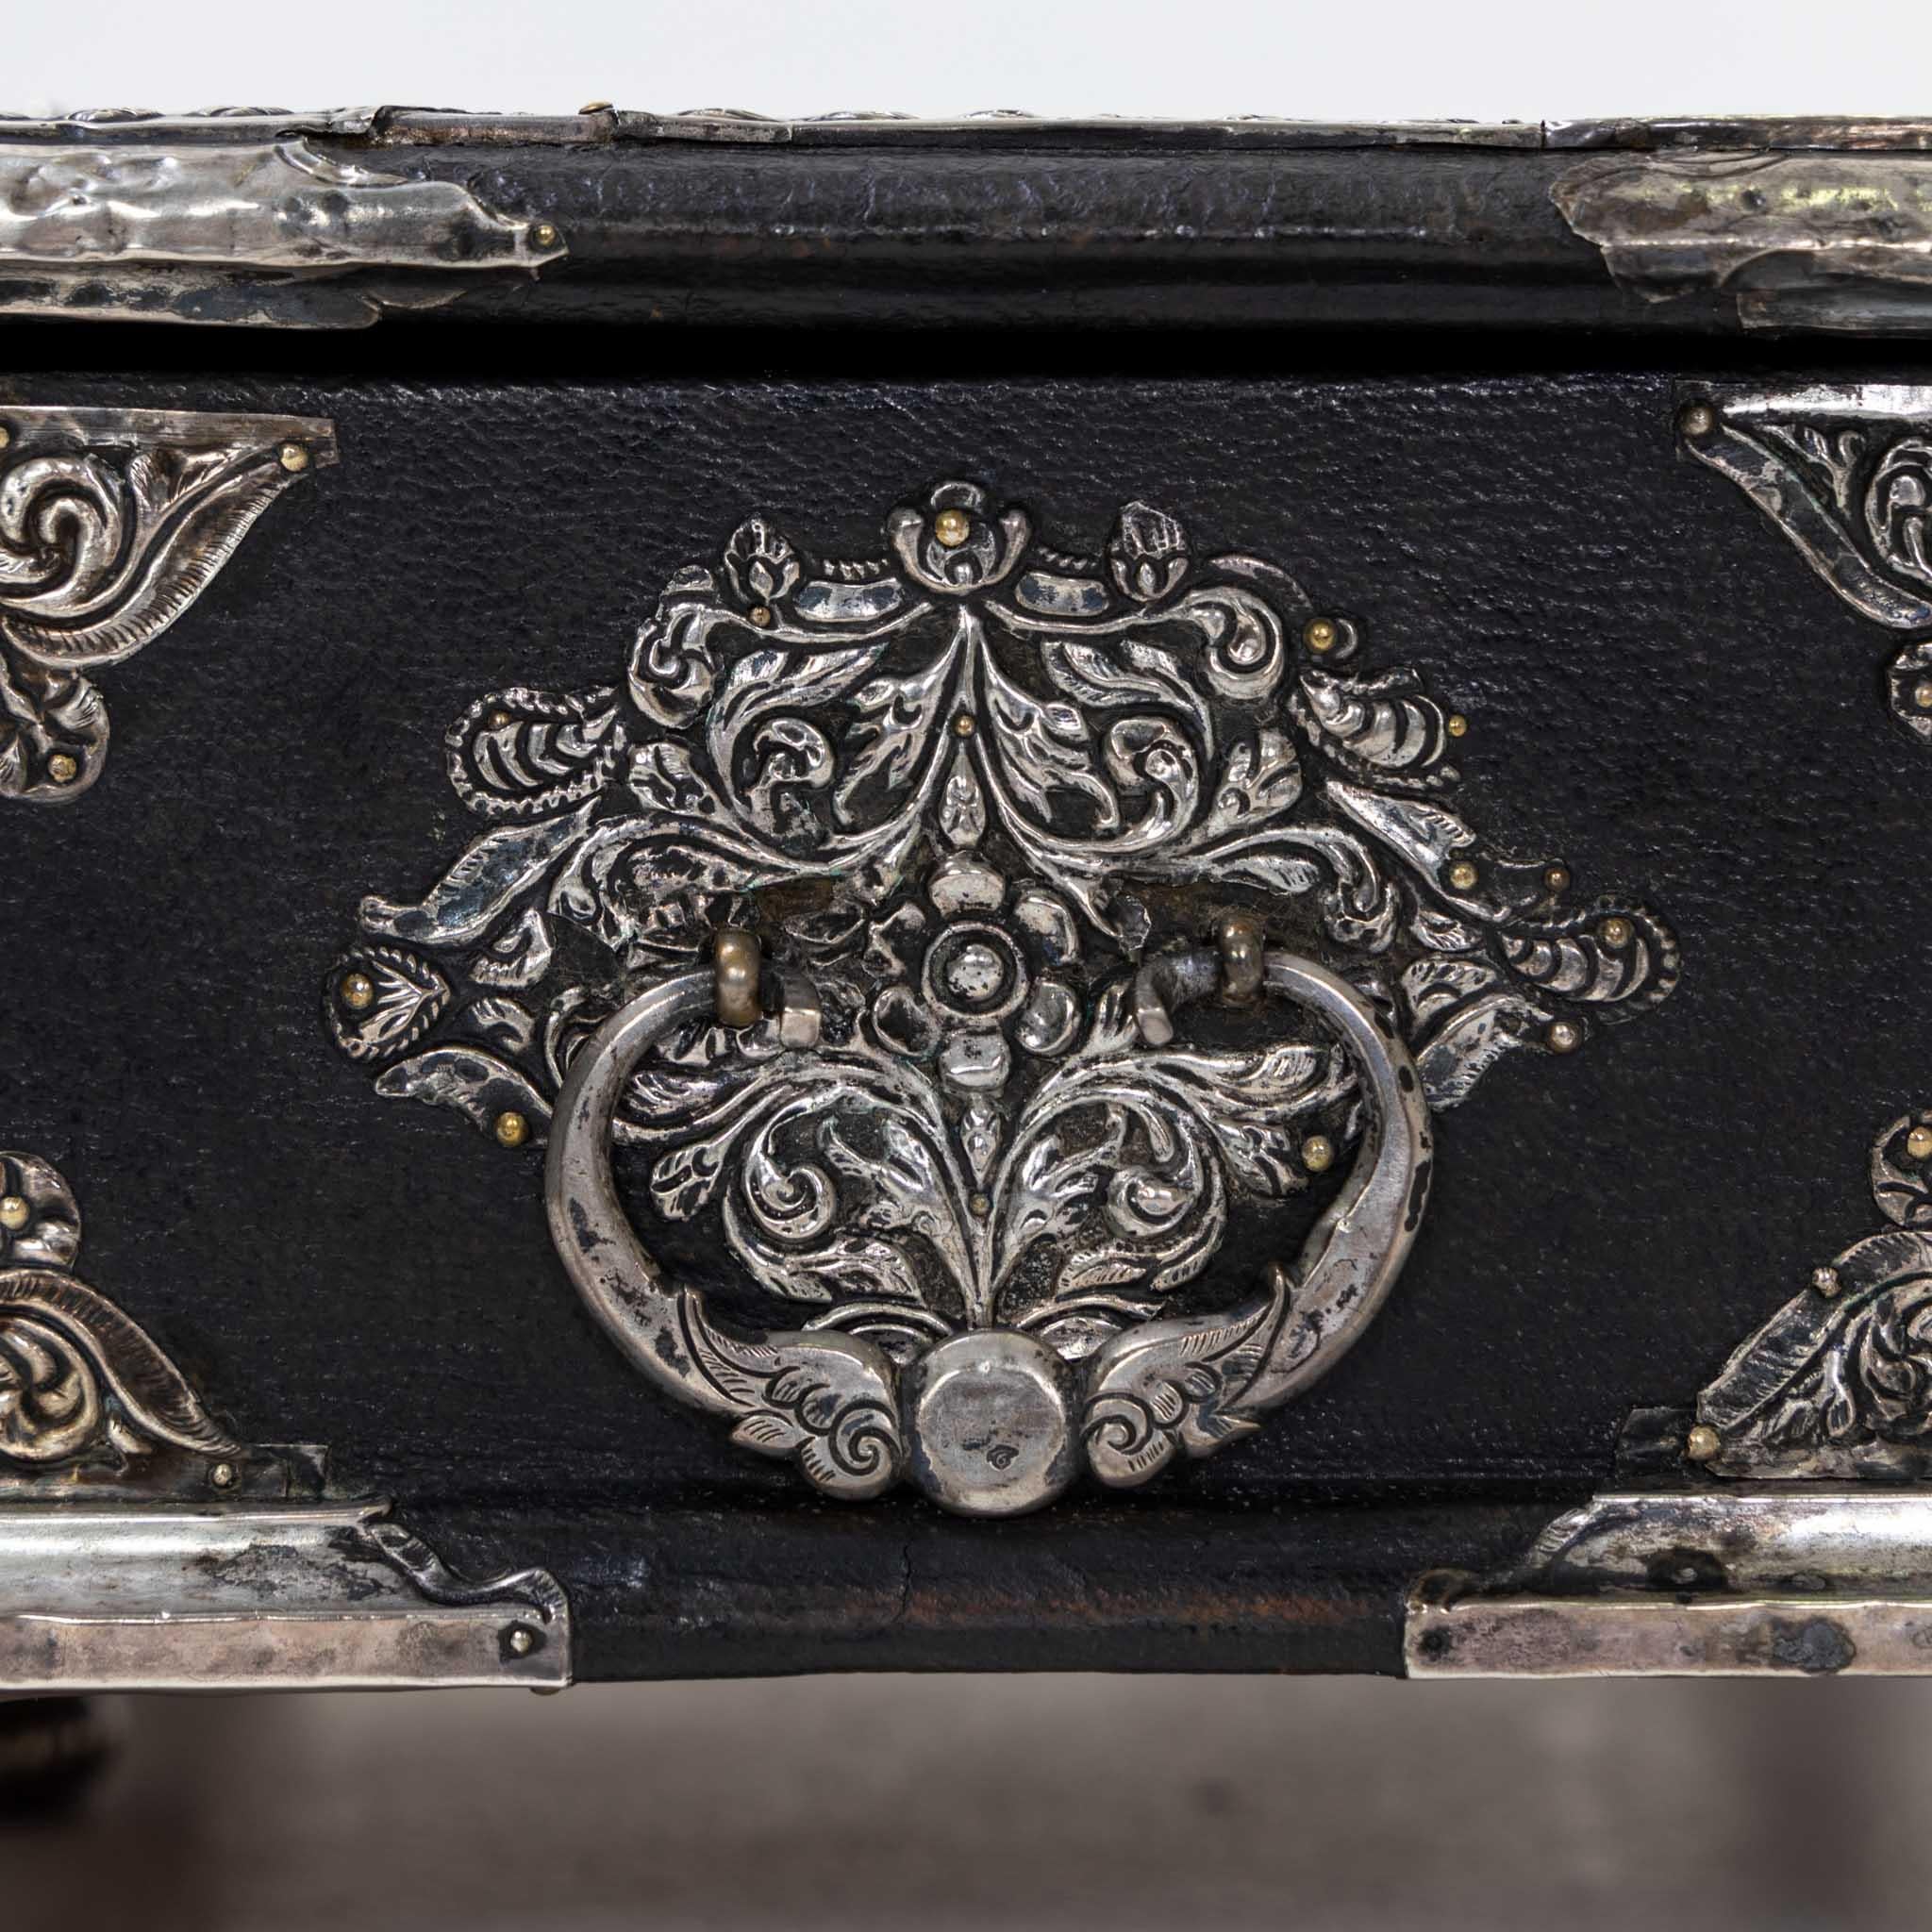 19th Century Casket, Indian Colonial Work